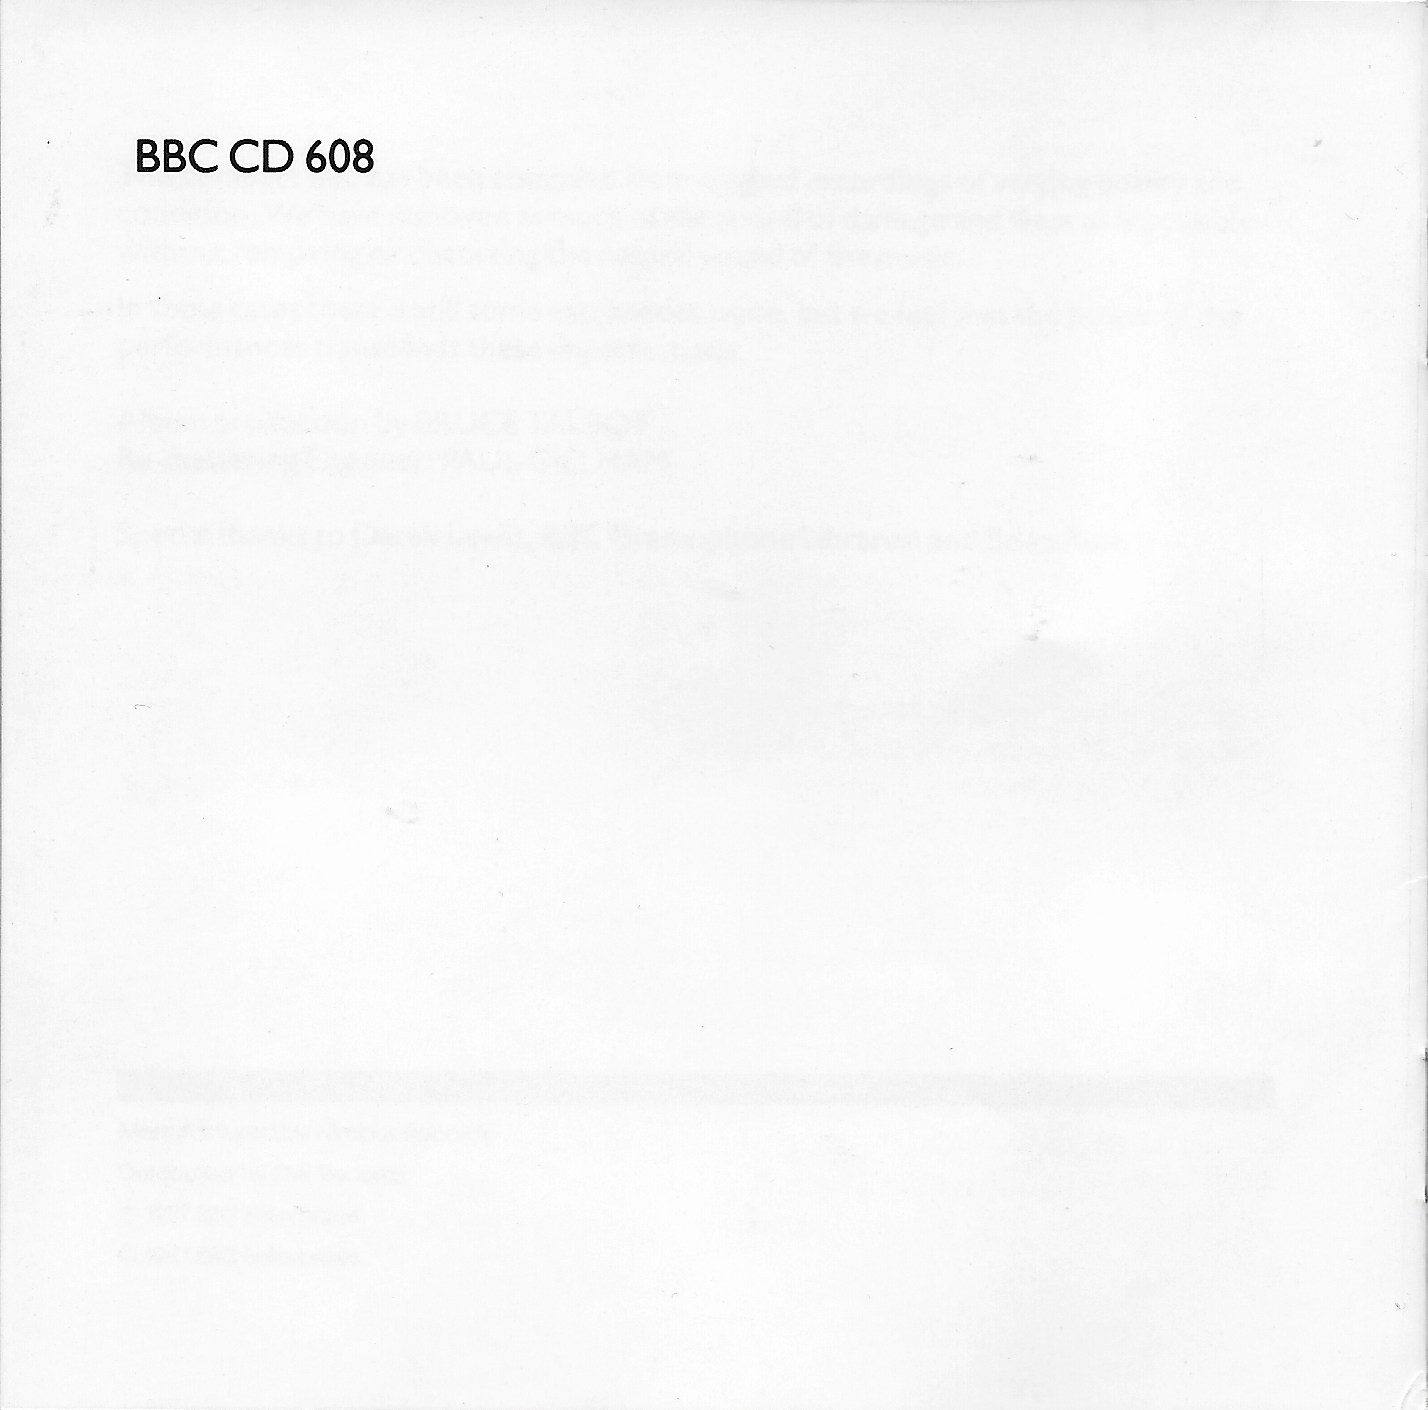 Middle of cover of BBCCD608